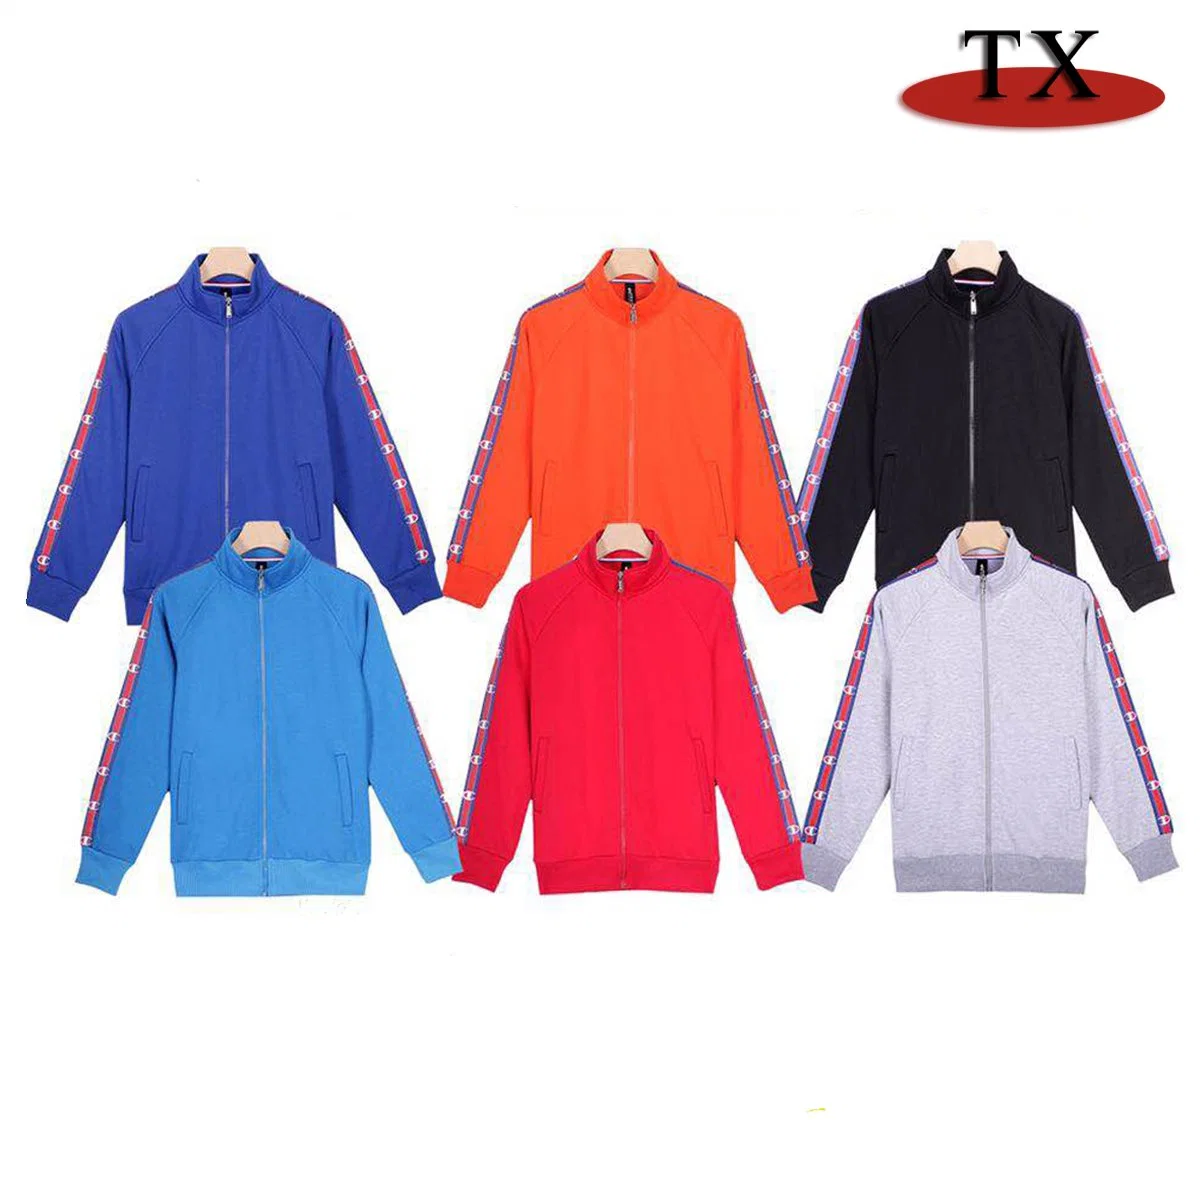 100% Cotton Sports Wear Sweater Clothing for Fleece Fabric Hooded Woolen Varsity Jackets with OEM Service